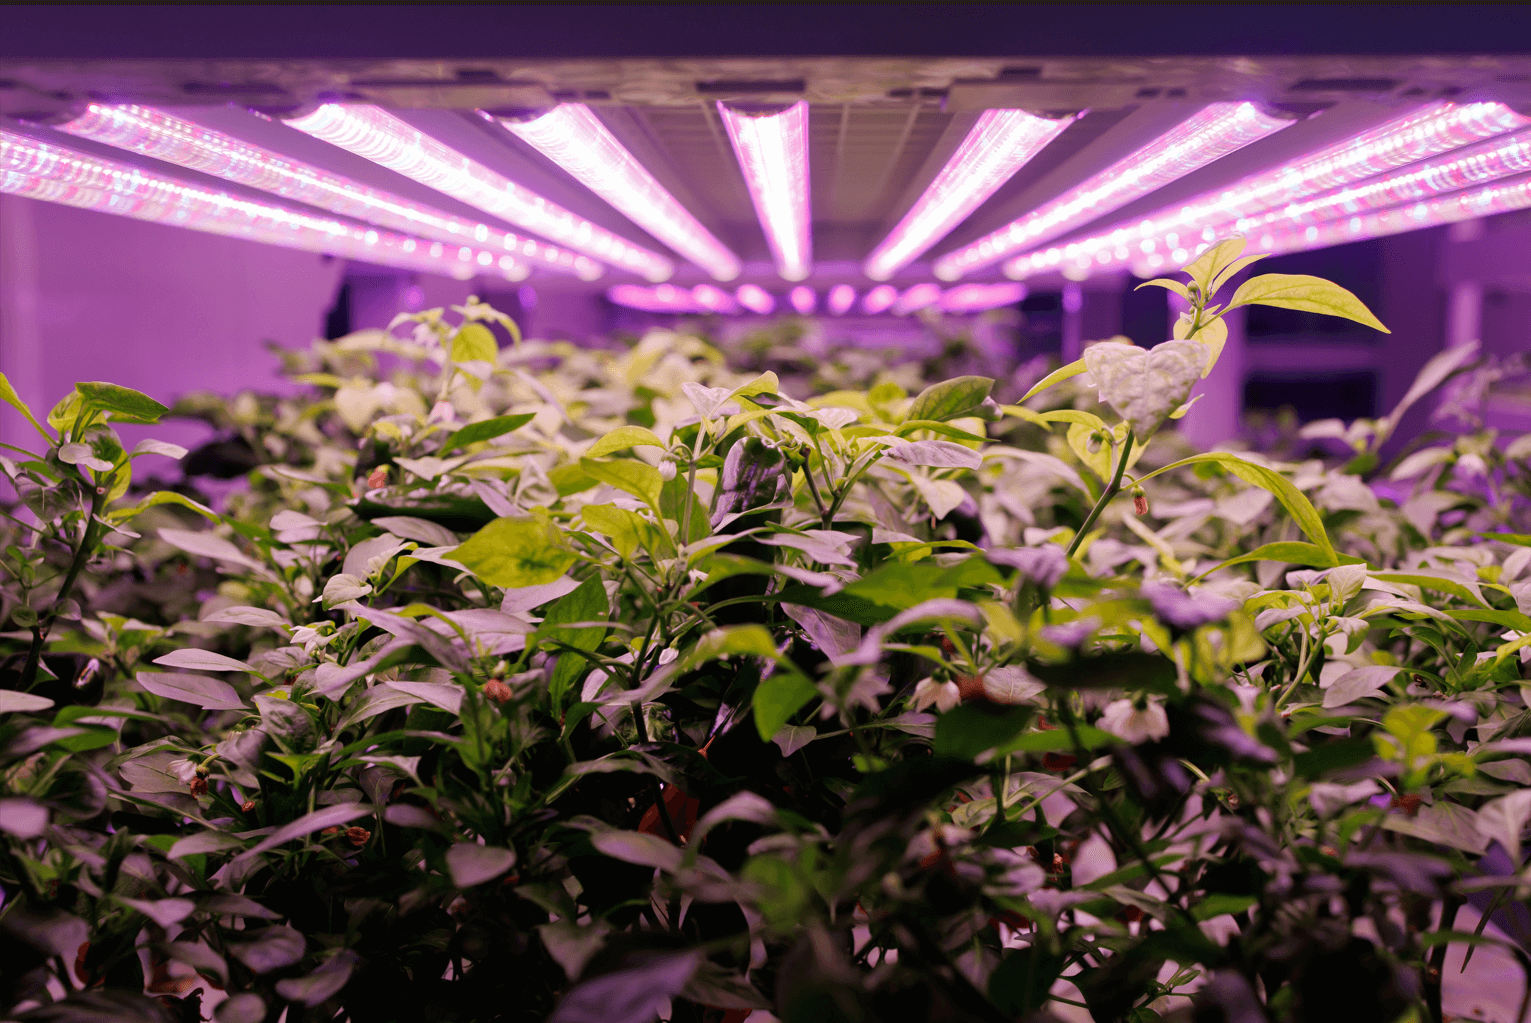 HOW FAR SHOULD LED GROW LIGHTS BE FROM PLANTS